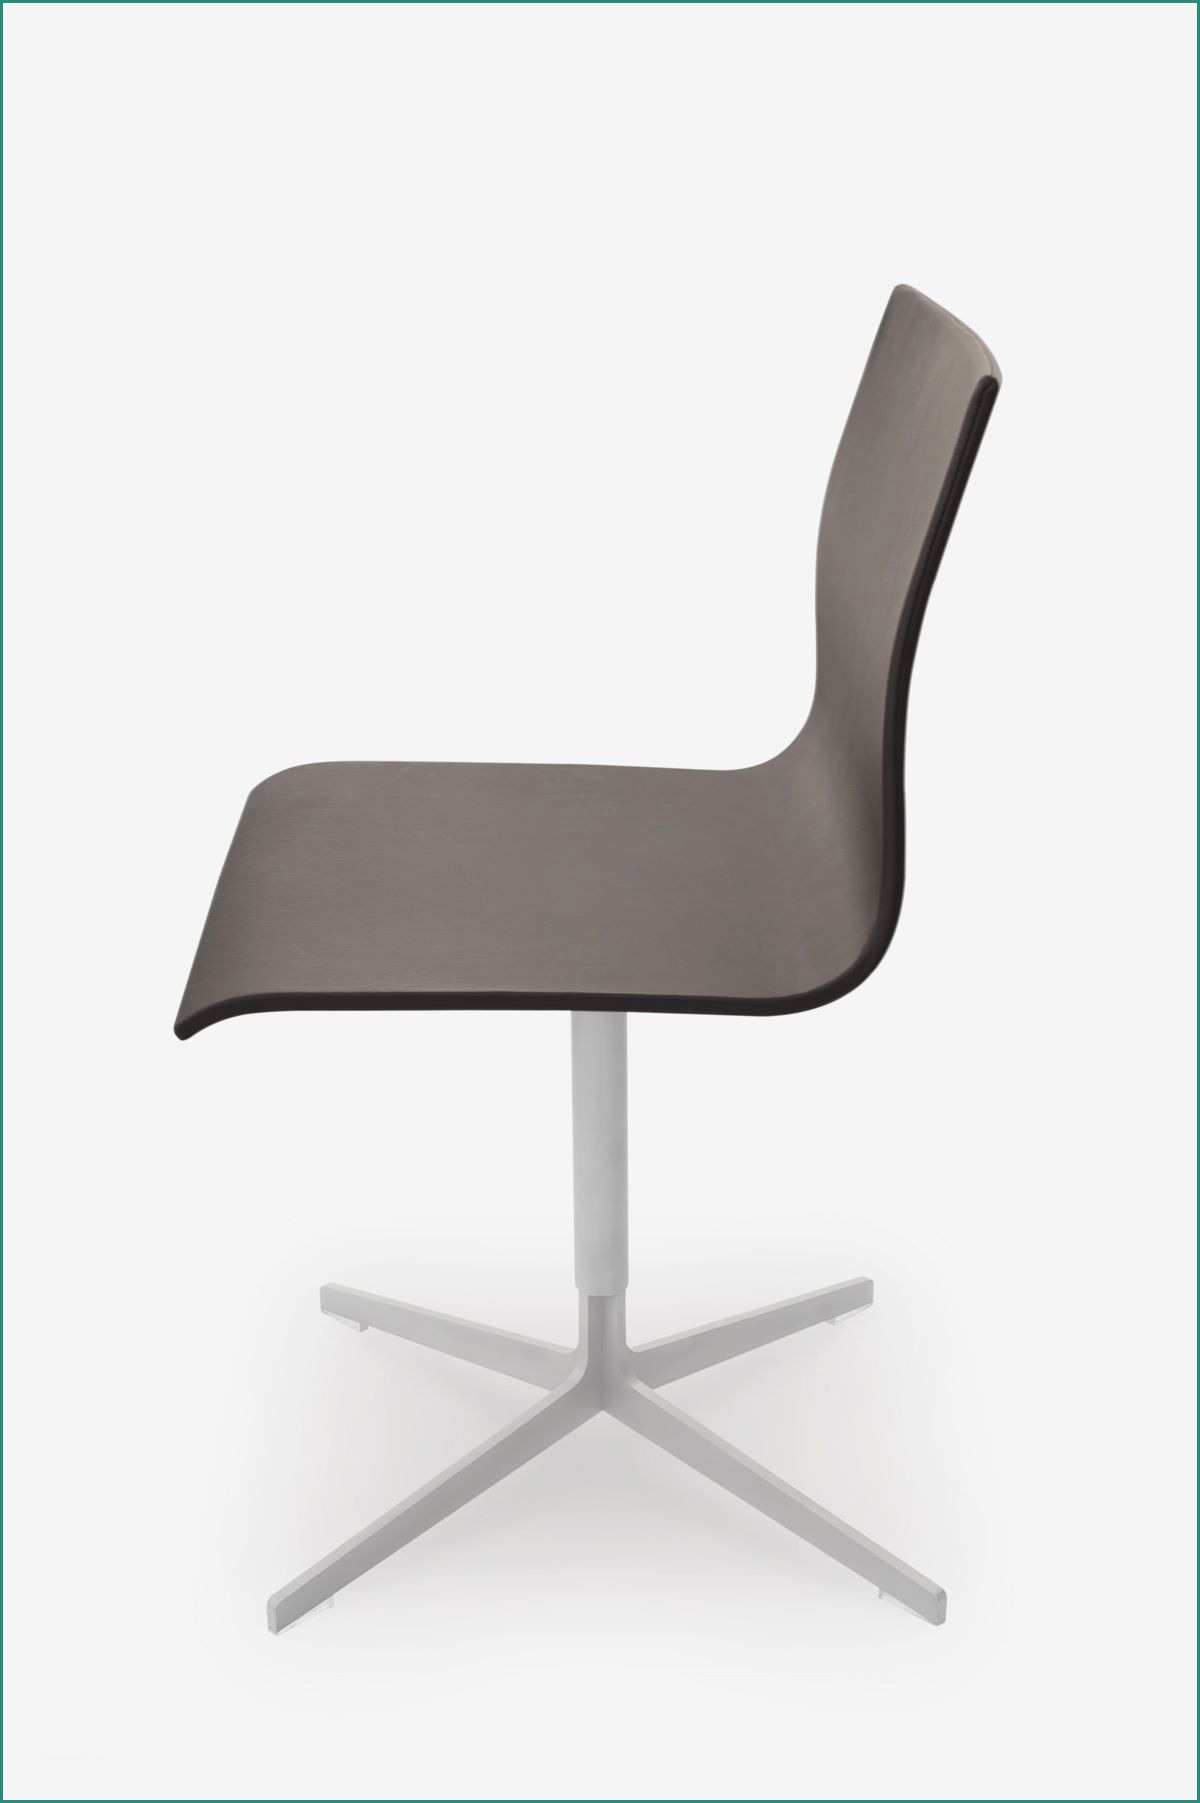 Alvar Aalto Sedie E Brown Chair with Clean Lines and Slender Proportions